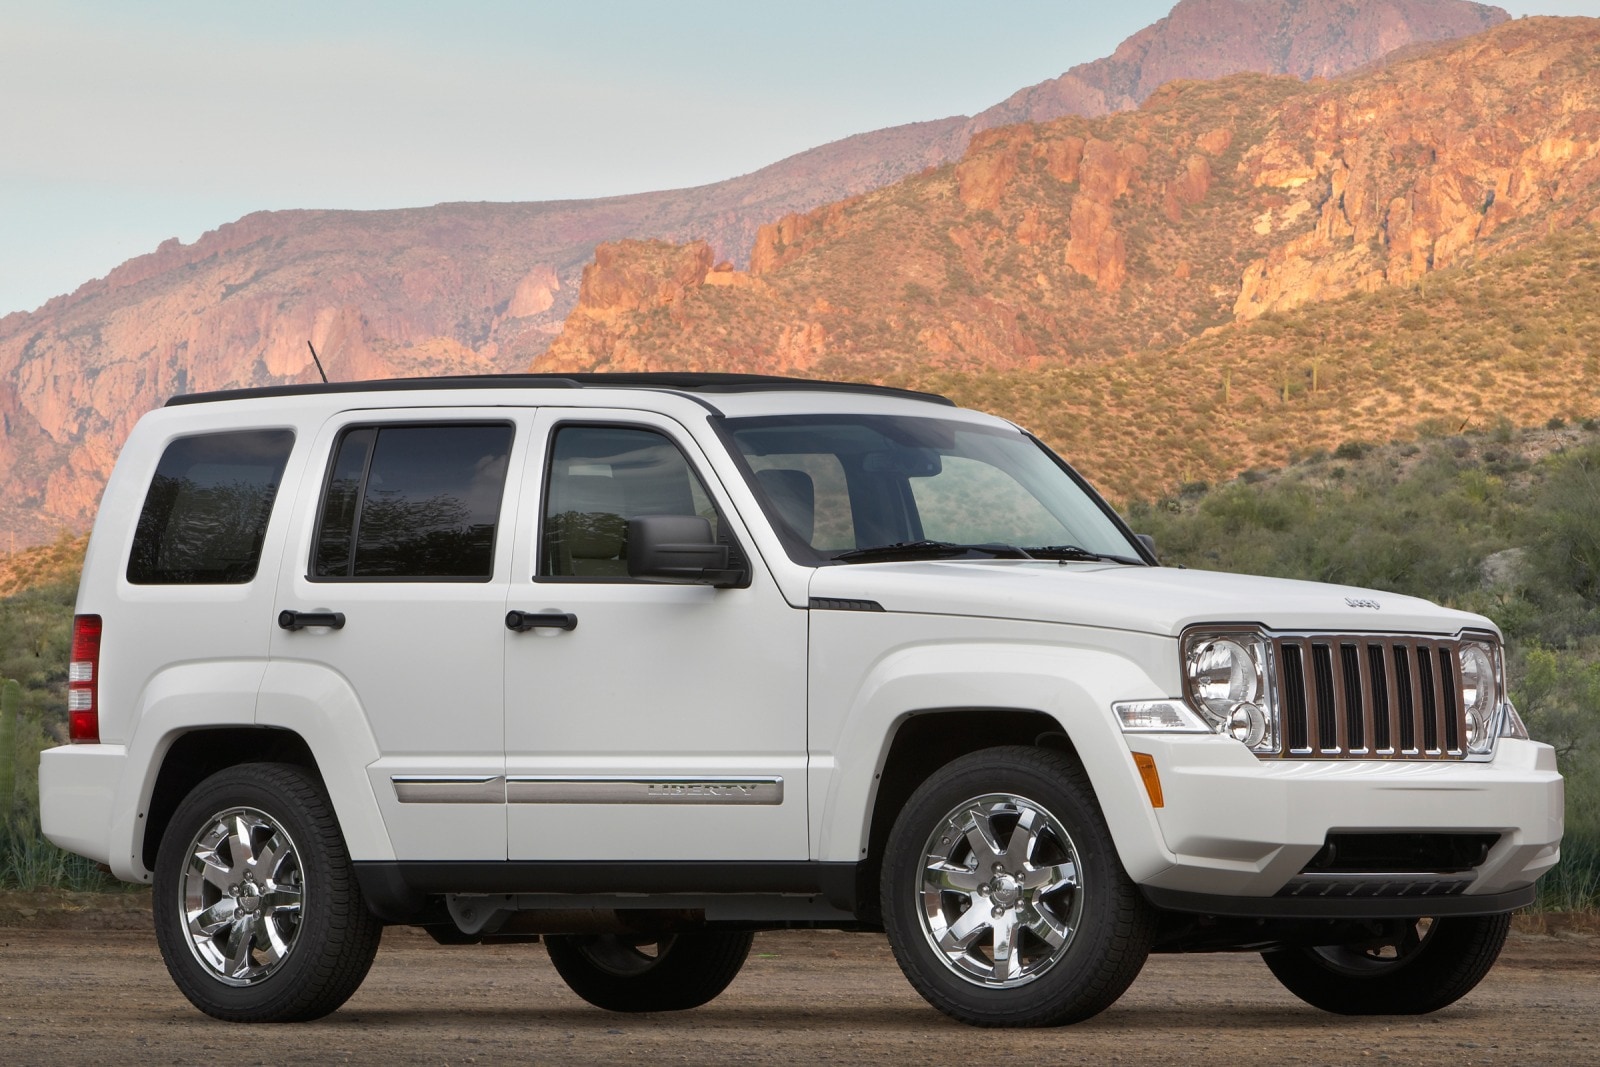 2010 Jeep Liberty Review & Ratings | Edmunds